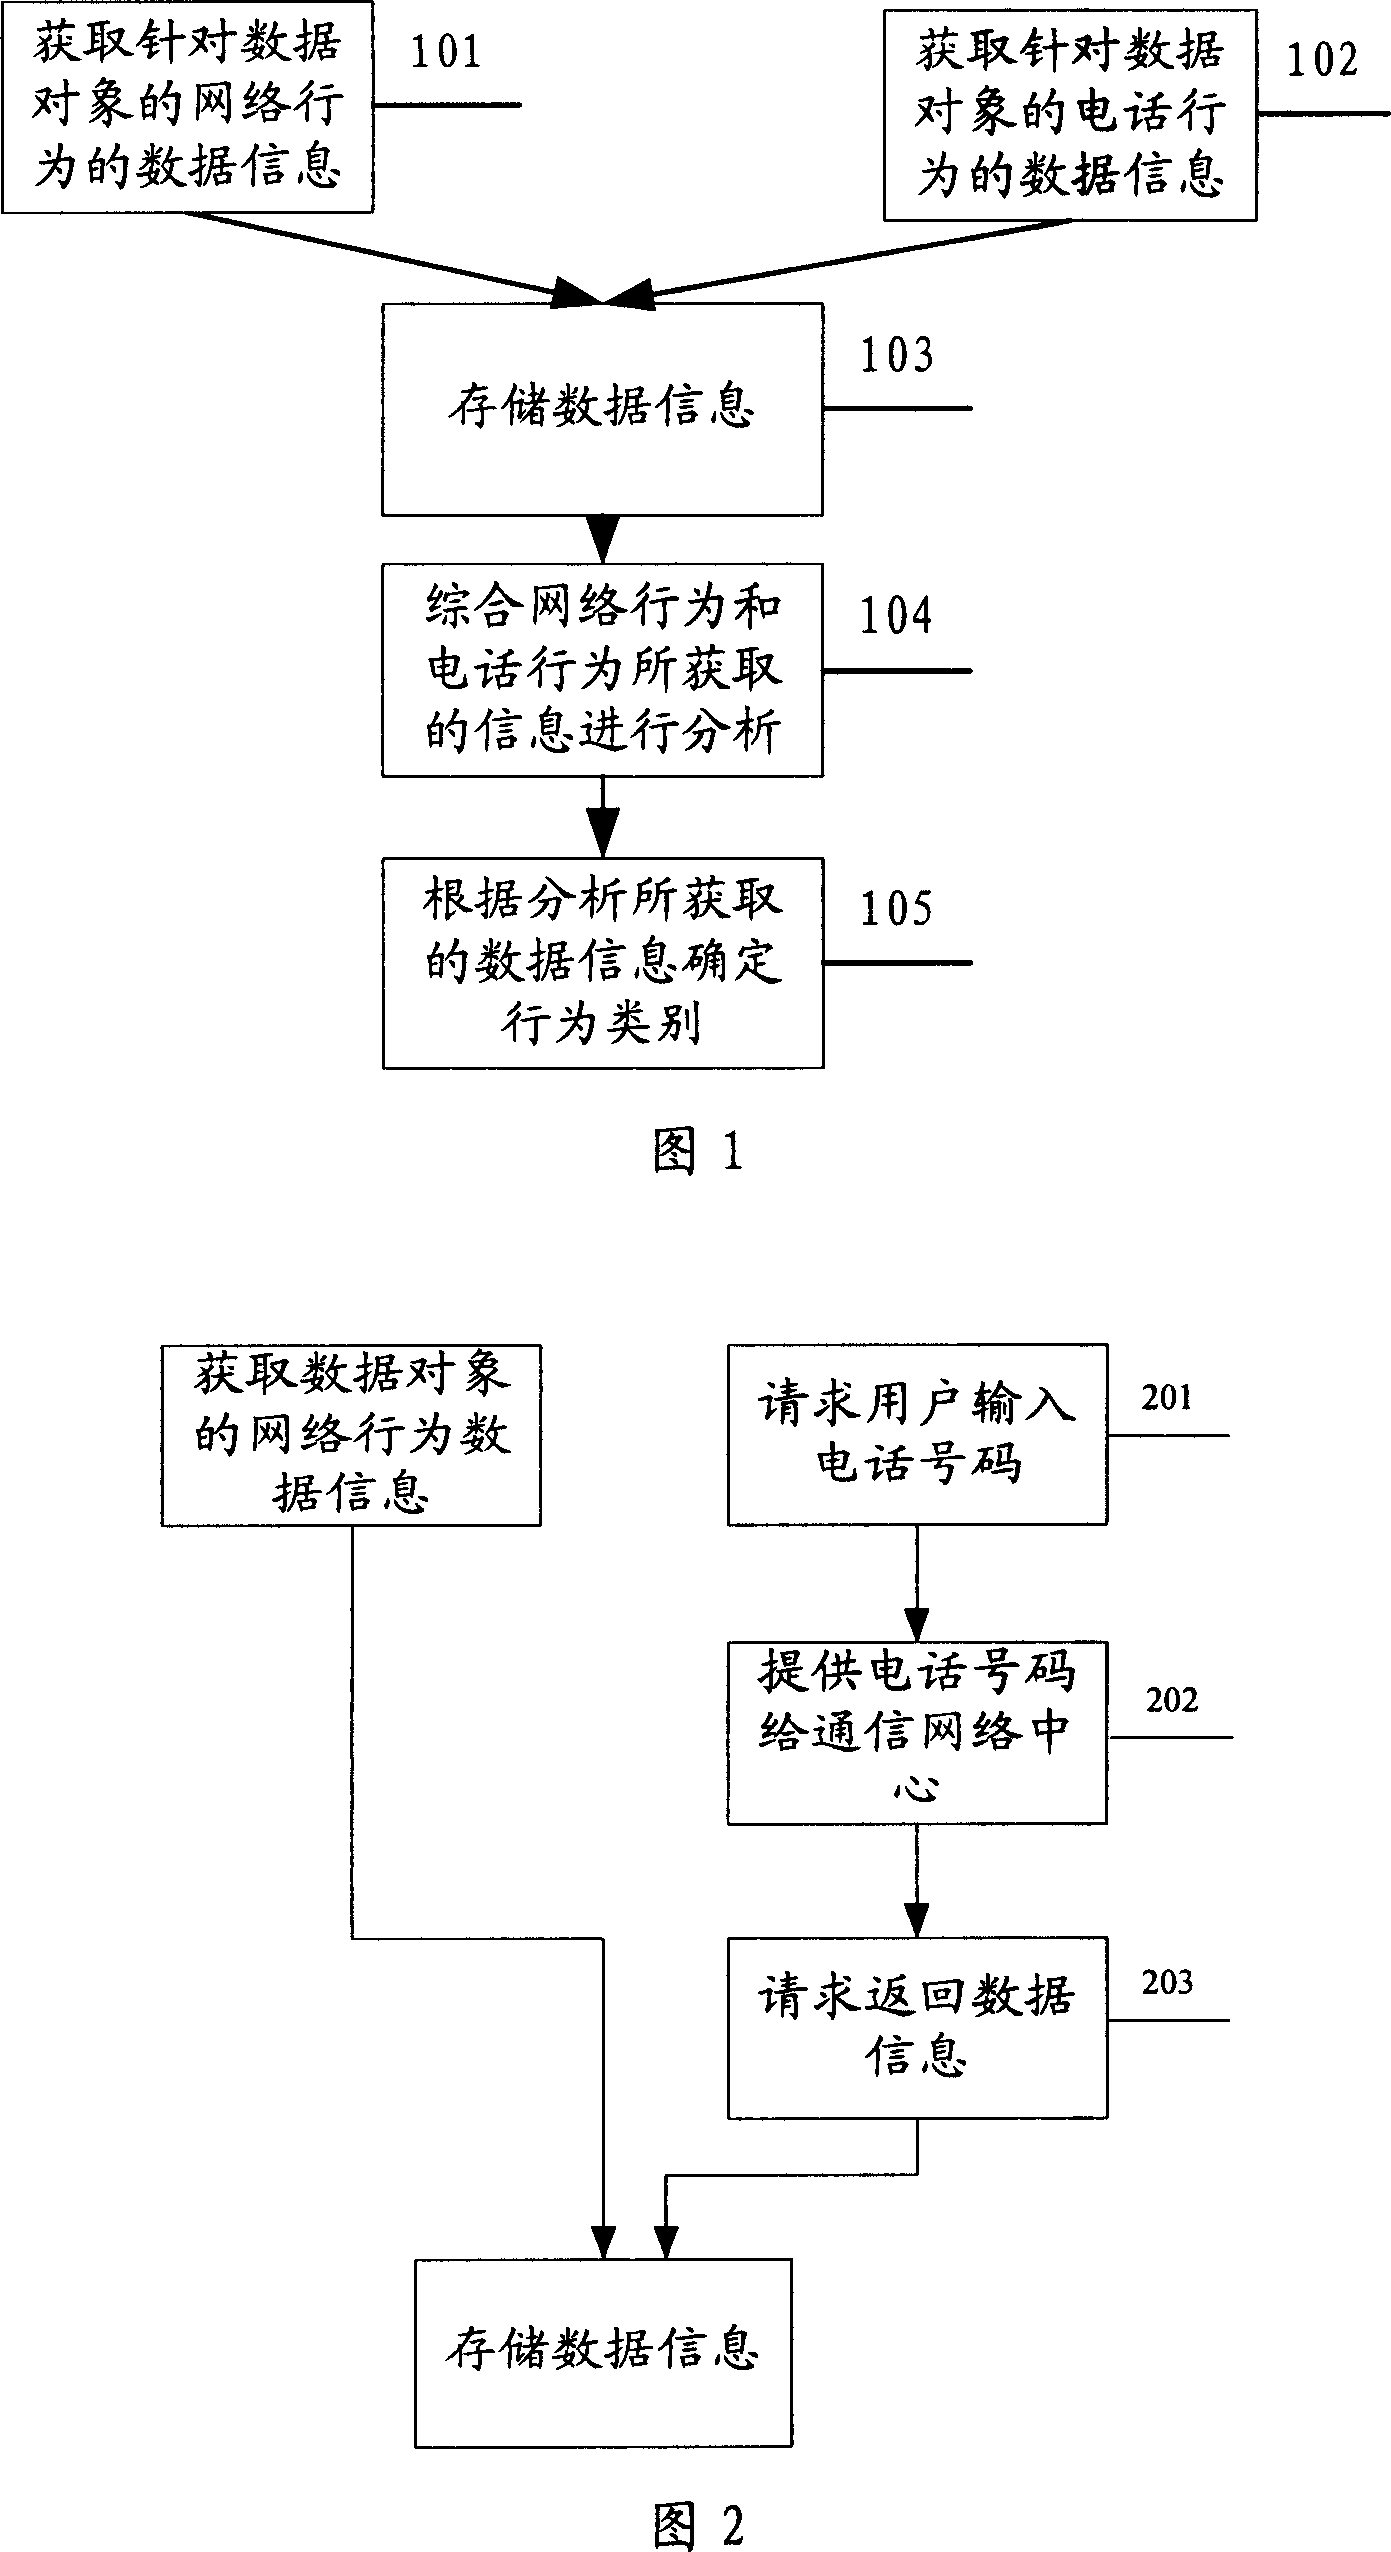 Method and apparatus for obtaining and analyzing data information aimed at data object